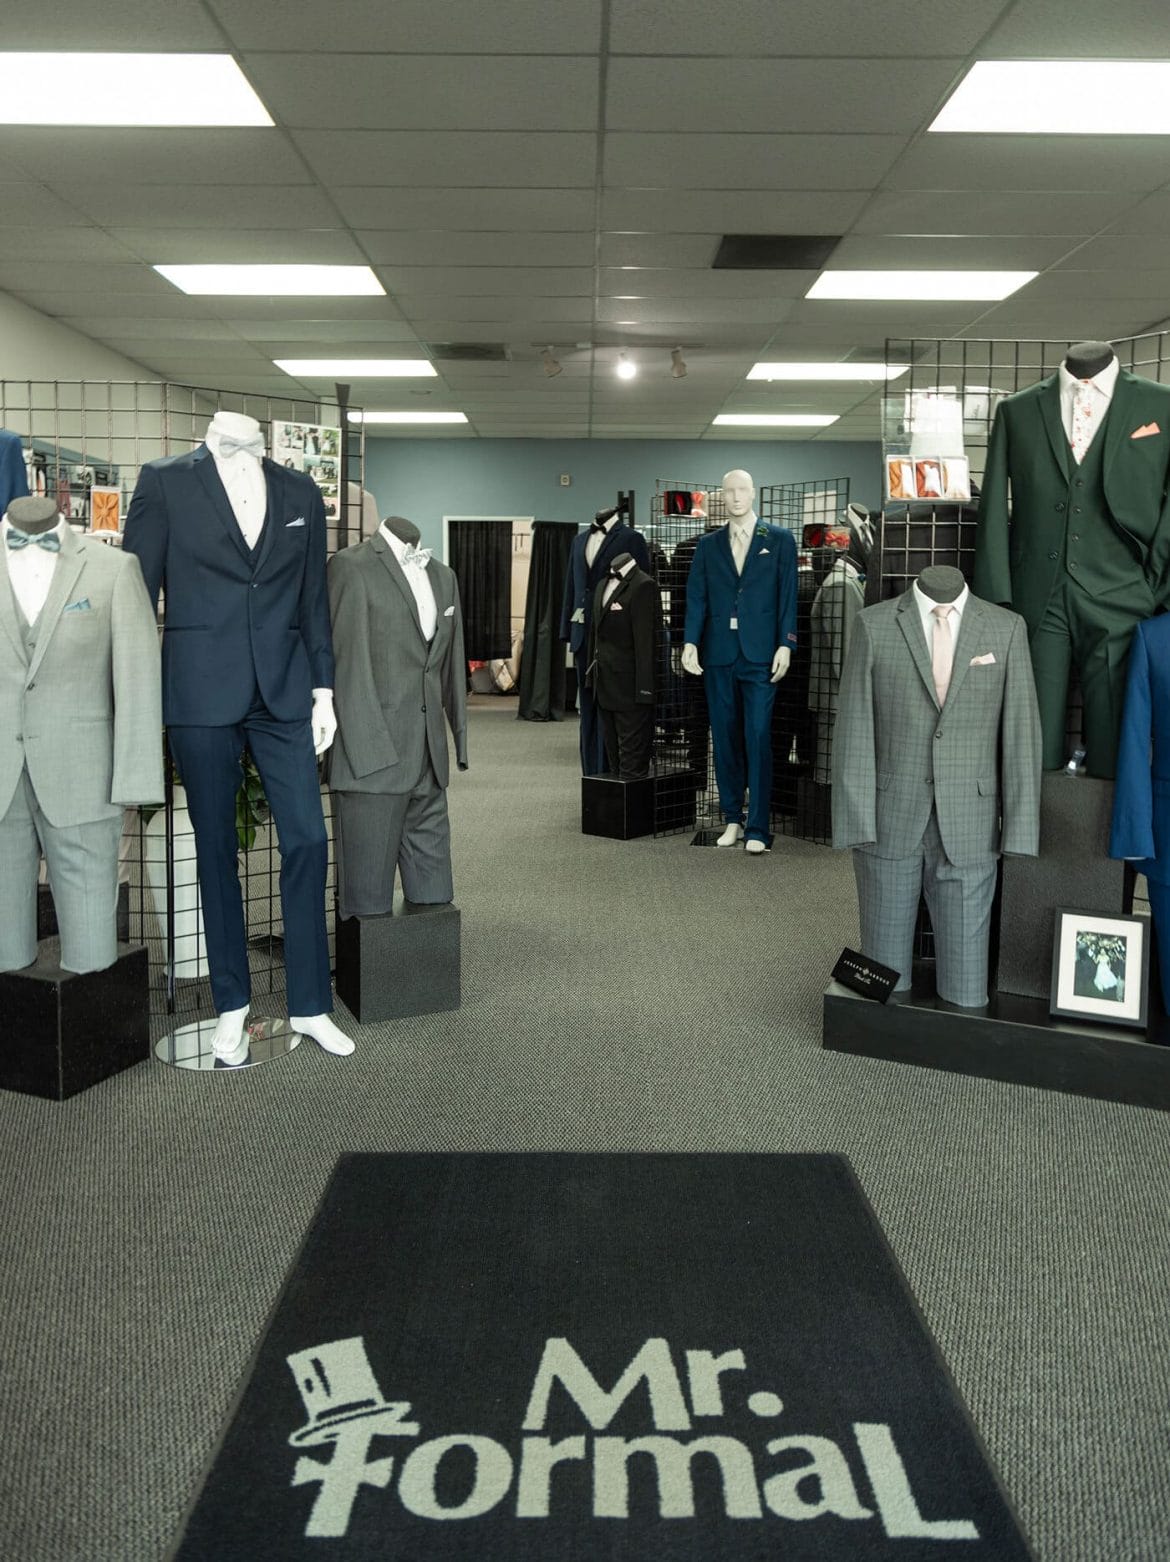 Mannequins dressed in tuxedos for suit rental in a store.